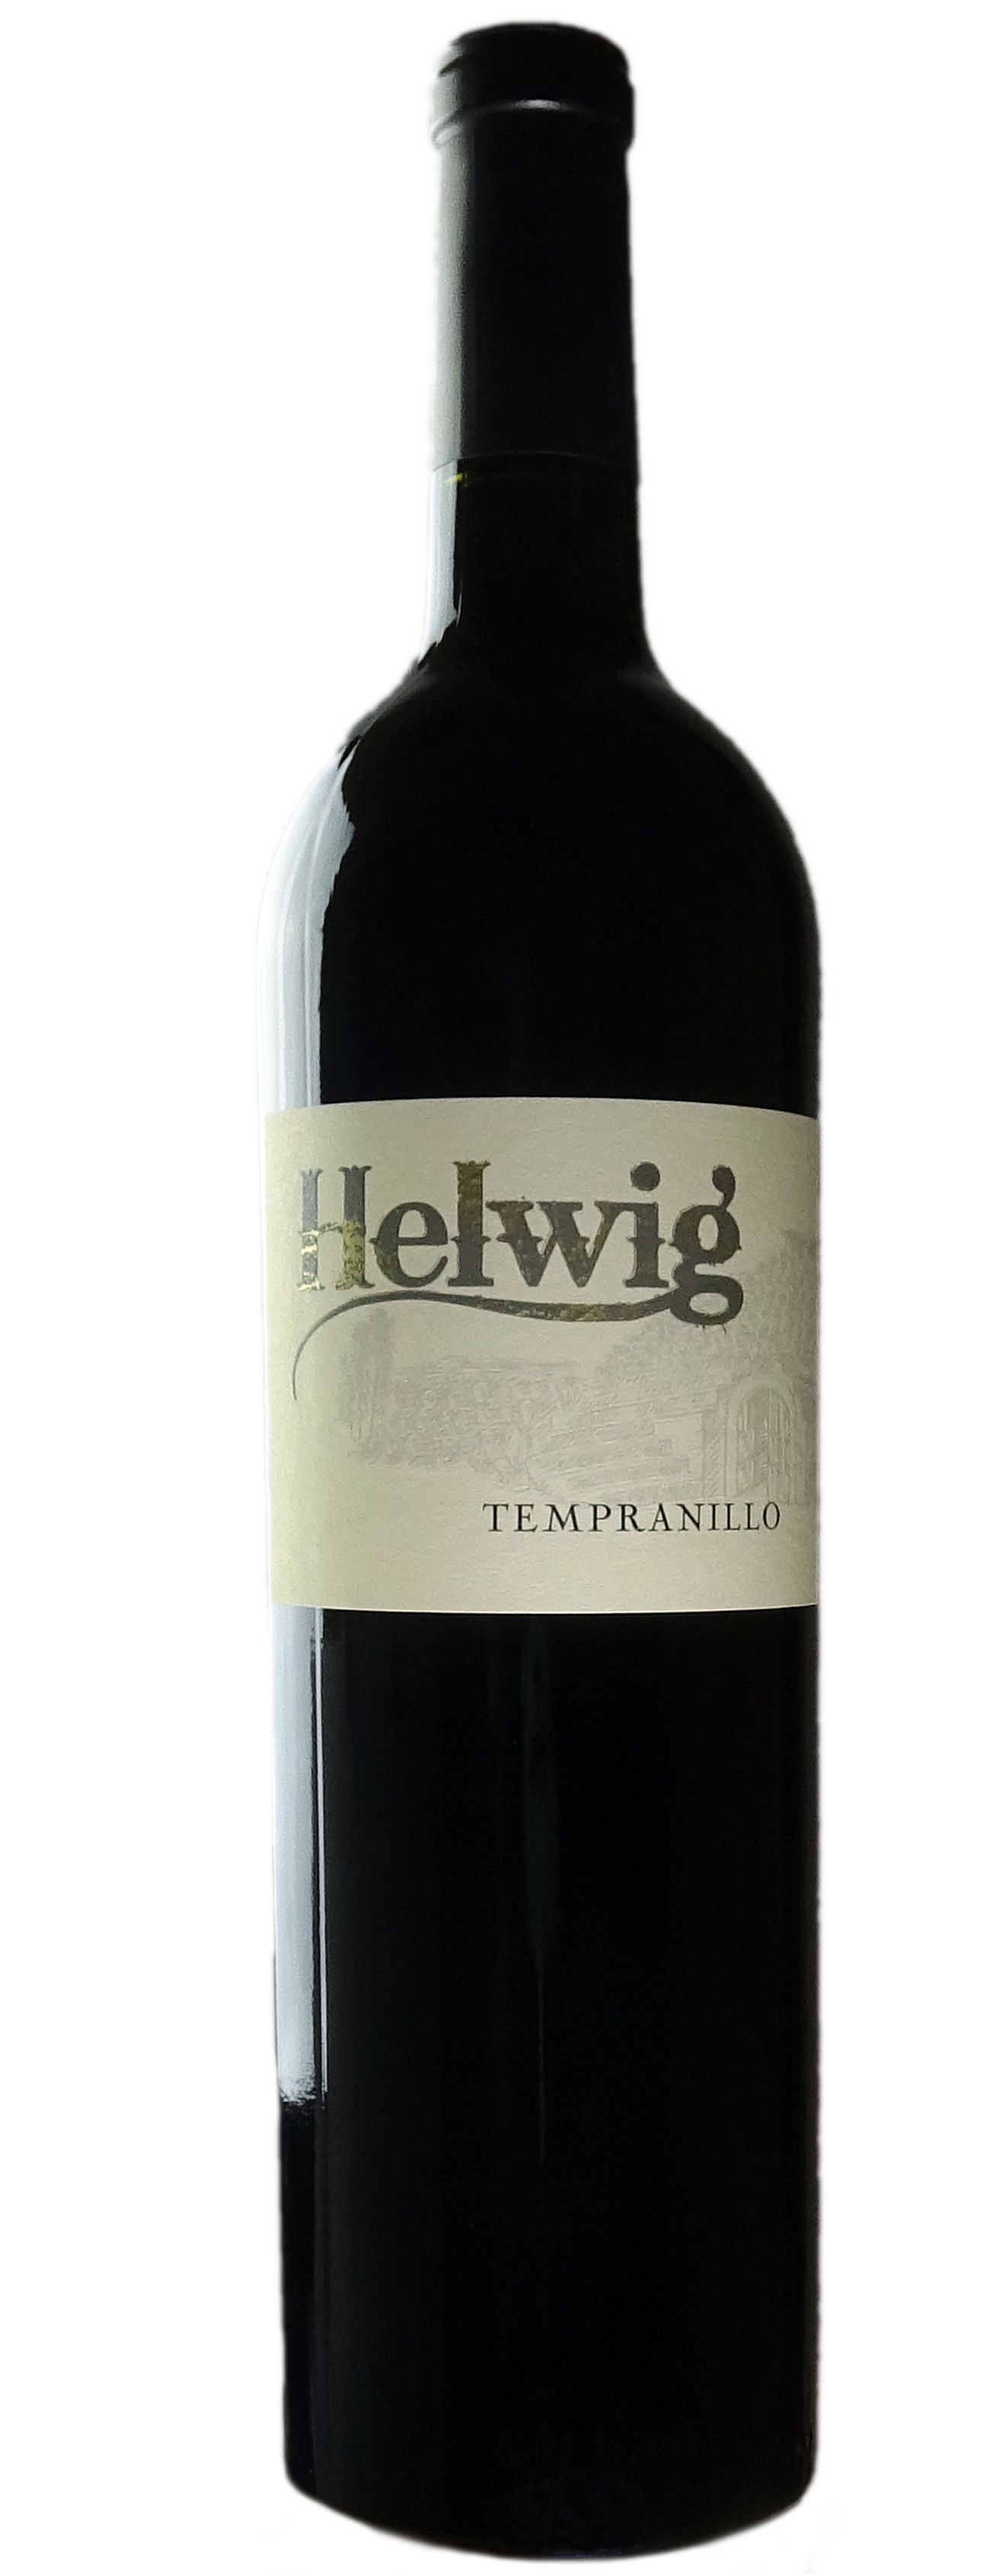 Product Image for Tempranillo '17